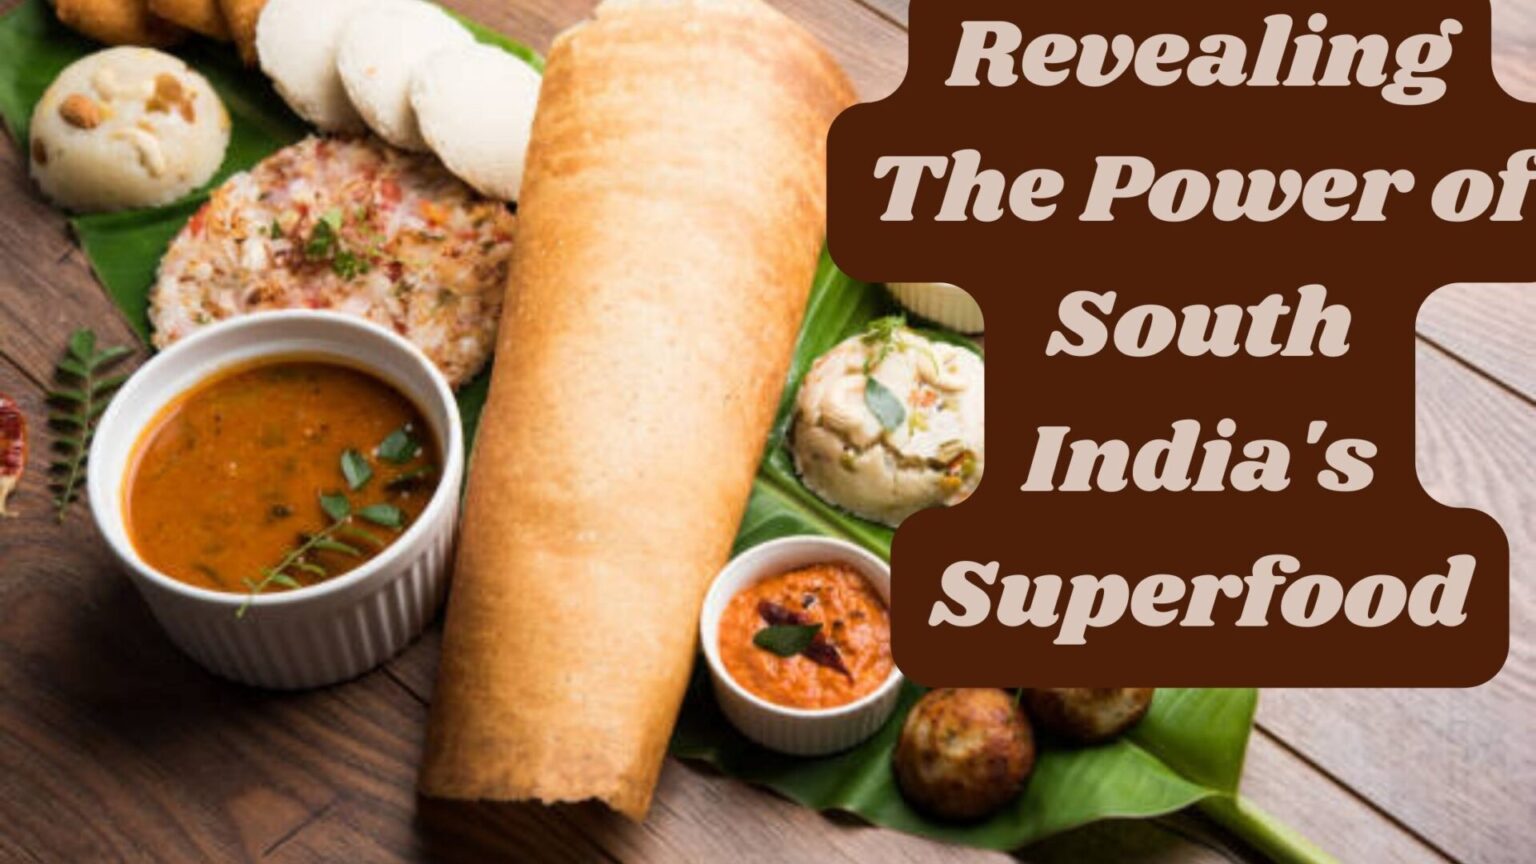 Revealing The Power of South India's Superfood